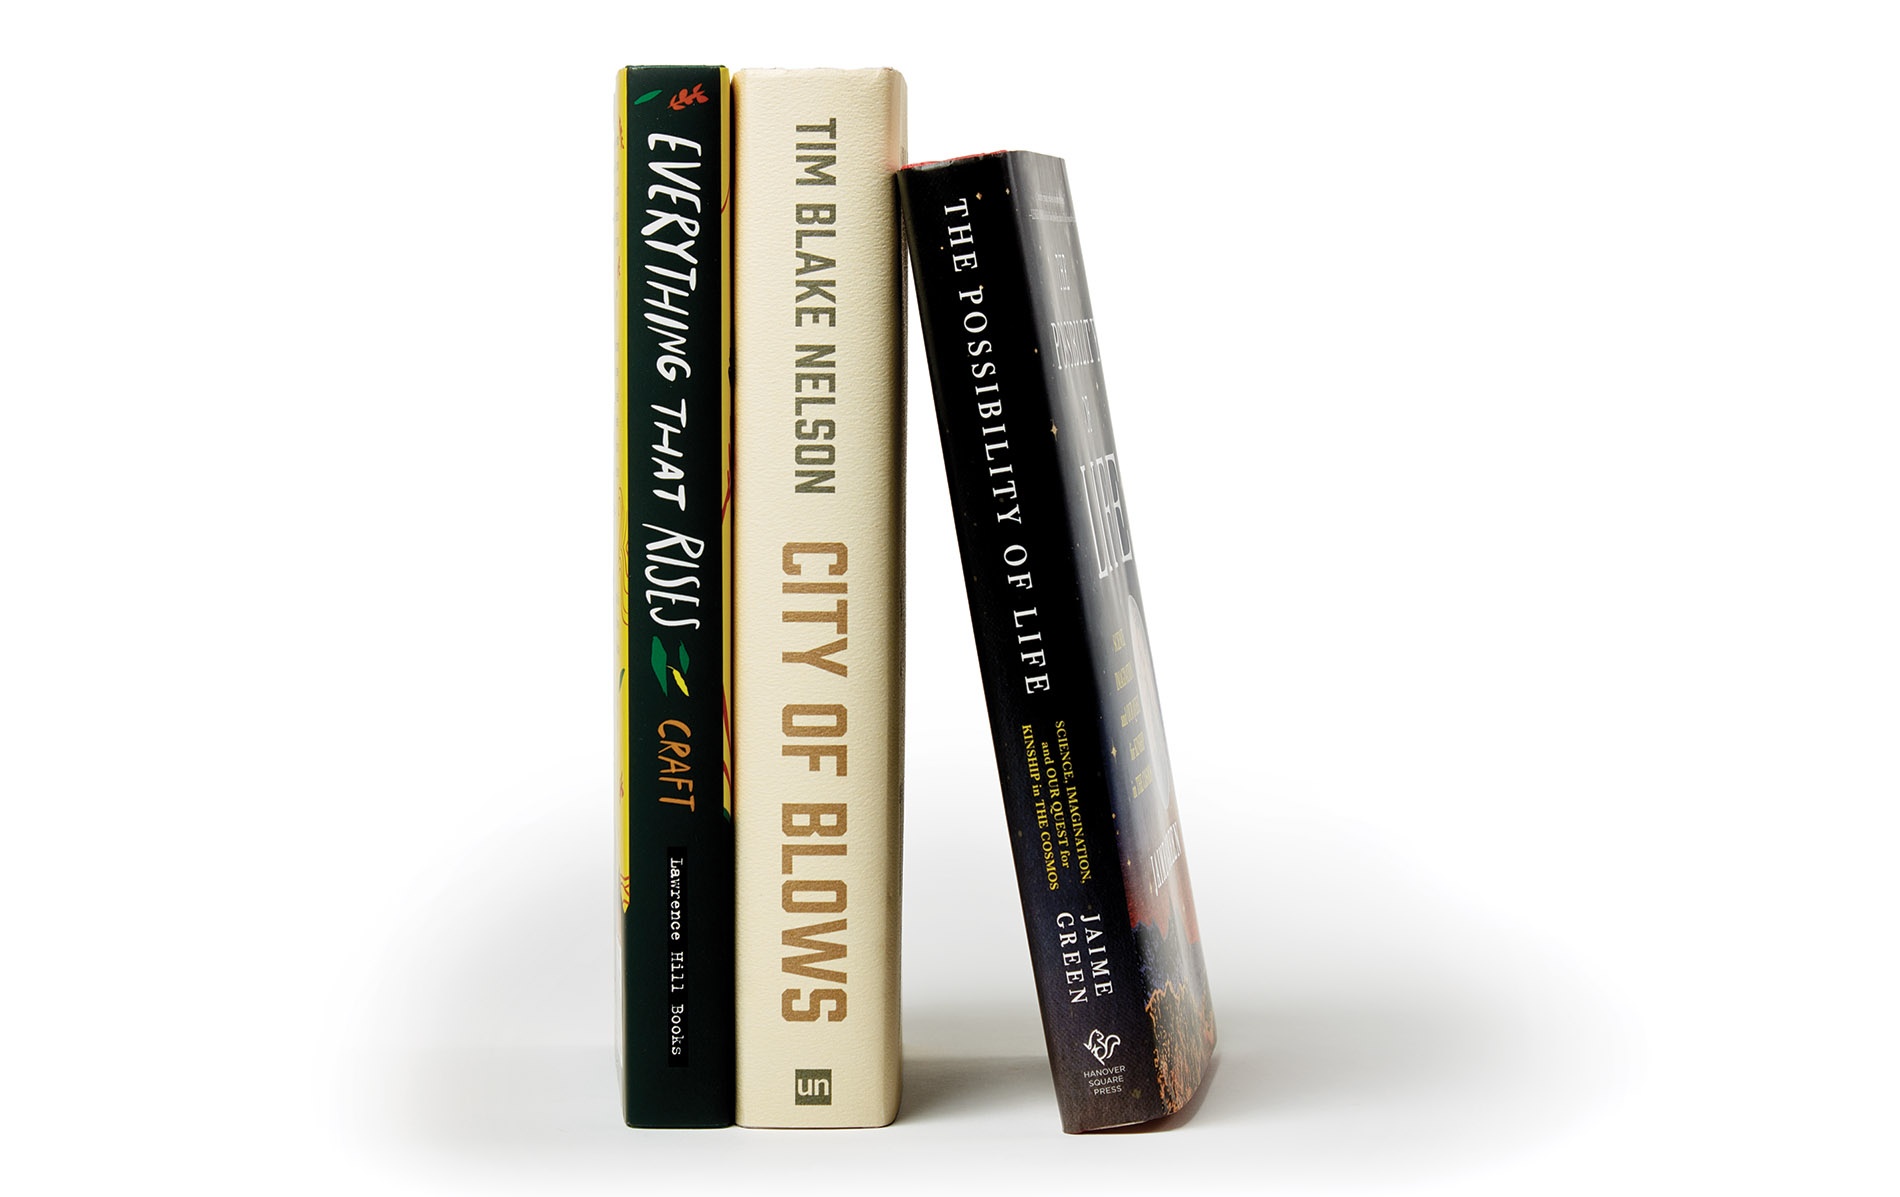 Image of book spines by Jaime Green ’04, Tim Blake Nelson ’86, and Brianna Craft ’13.